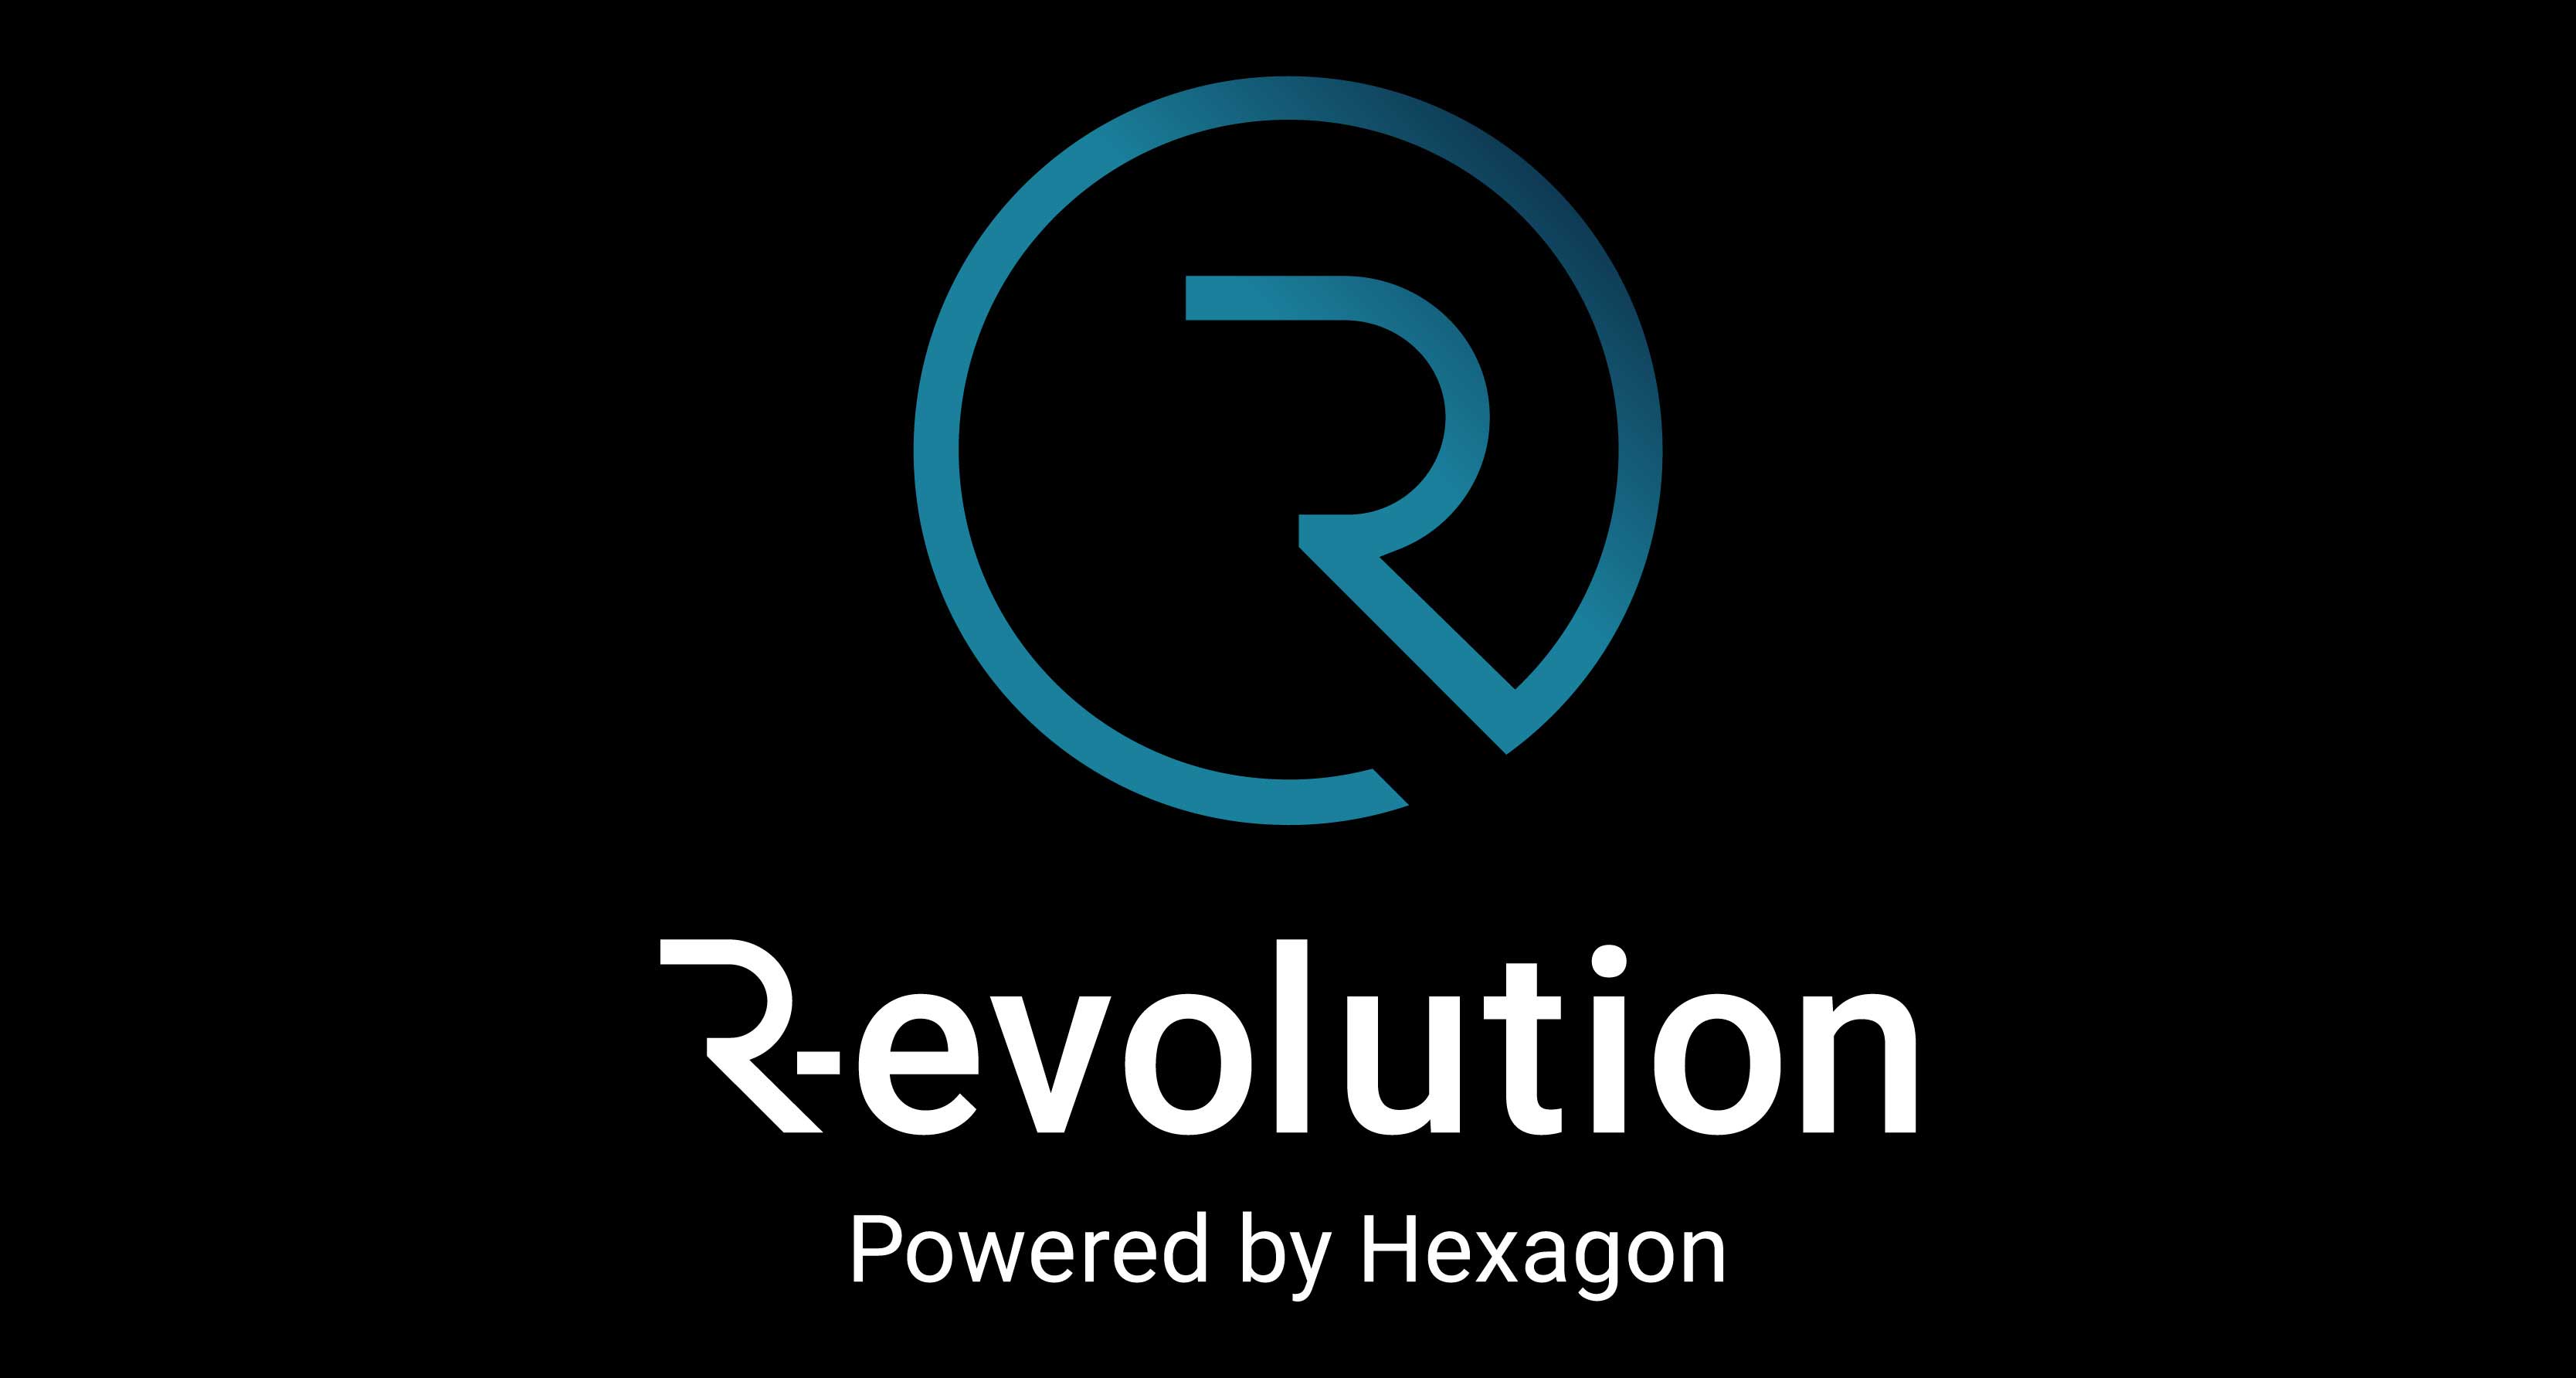 About Us | R-evolution